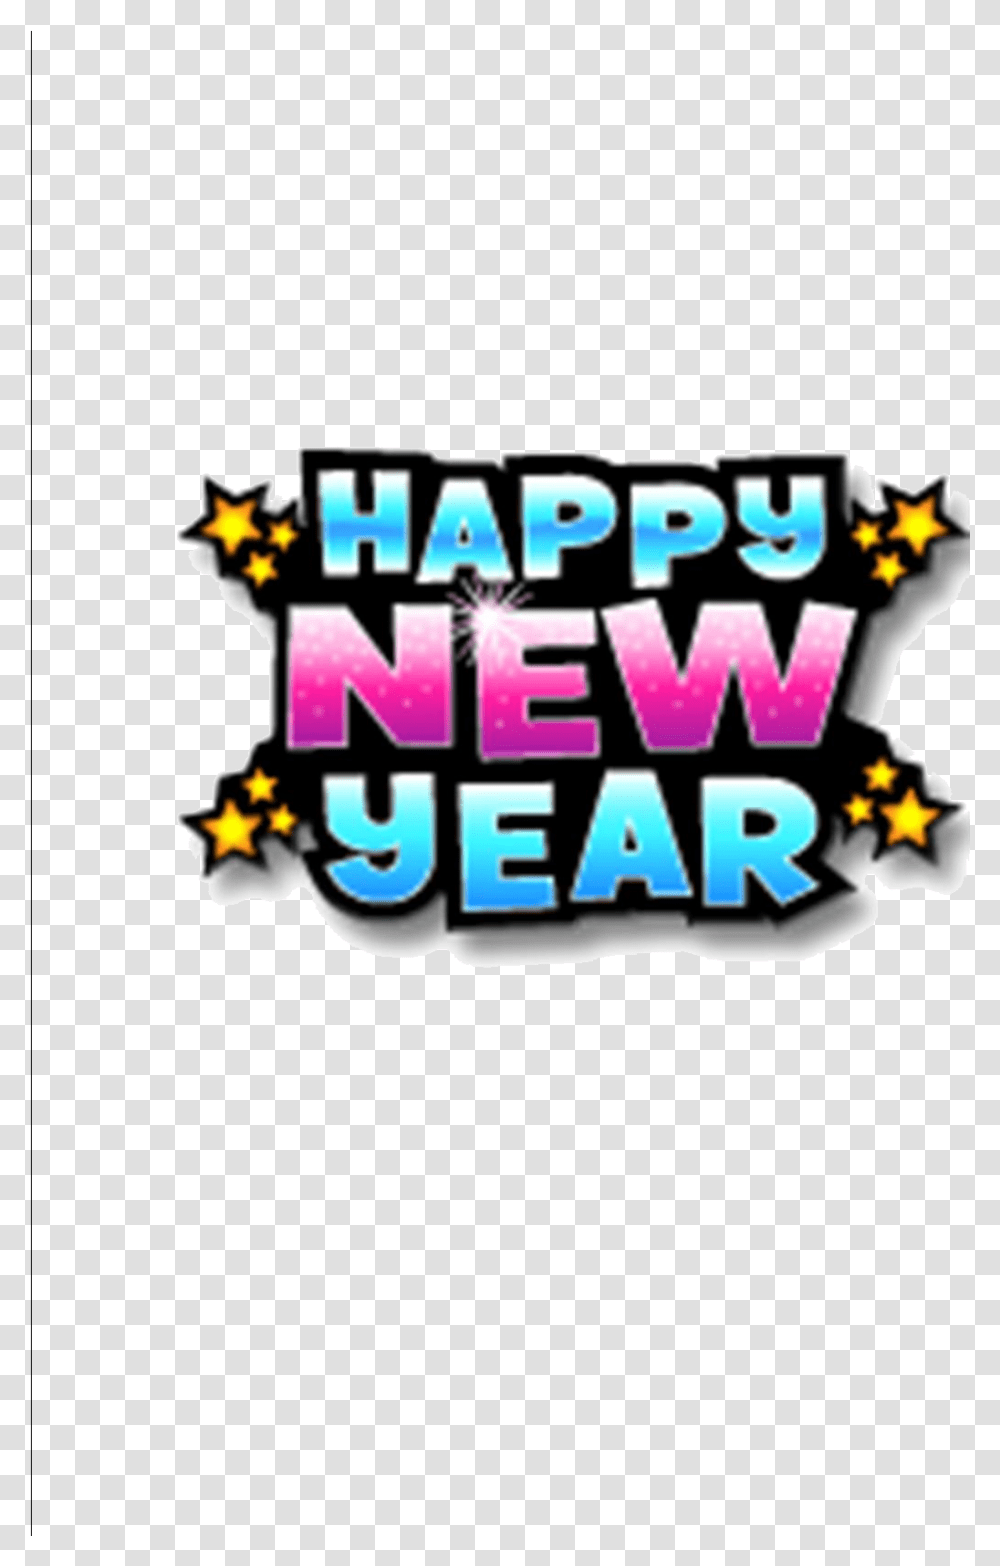 Happynew Year Happy New Clipart Hd Clipartfox Graphic Design, Pac Man, Super Mario Transparent Png